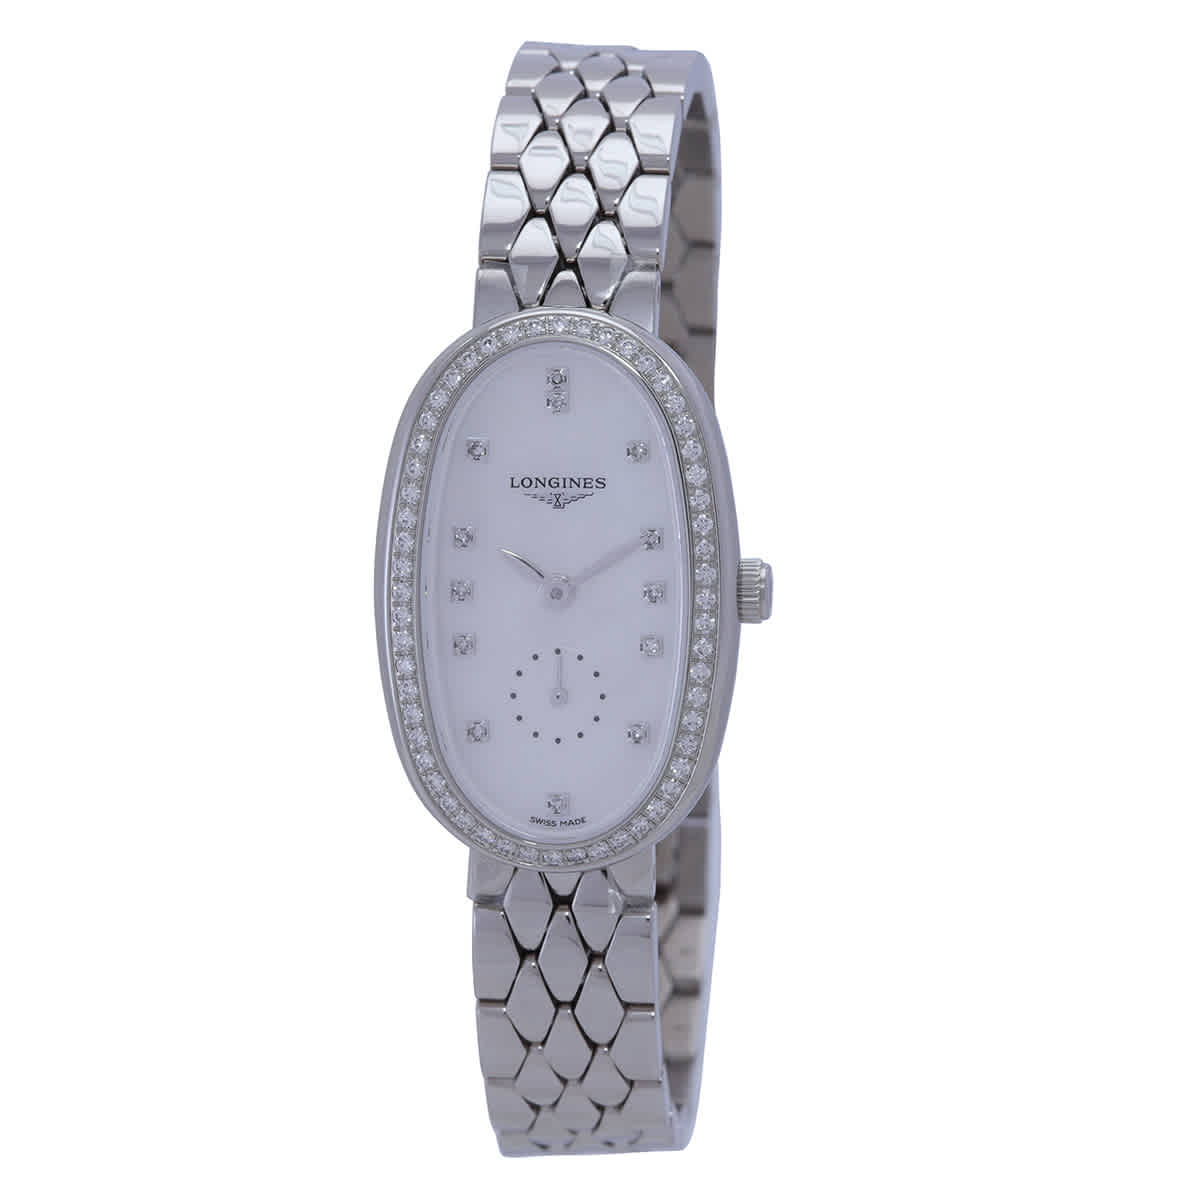 Longines Symphonette Diamond Ladies Watch L2.306.0.87.6 In Mother Of Pearl / White